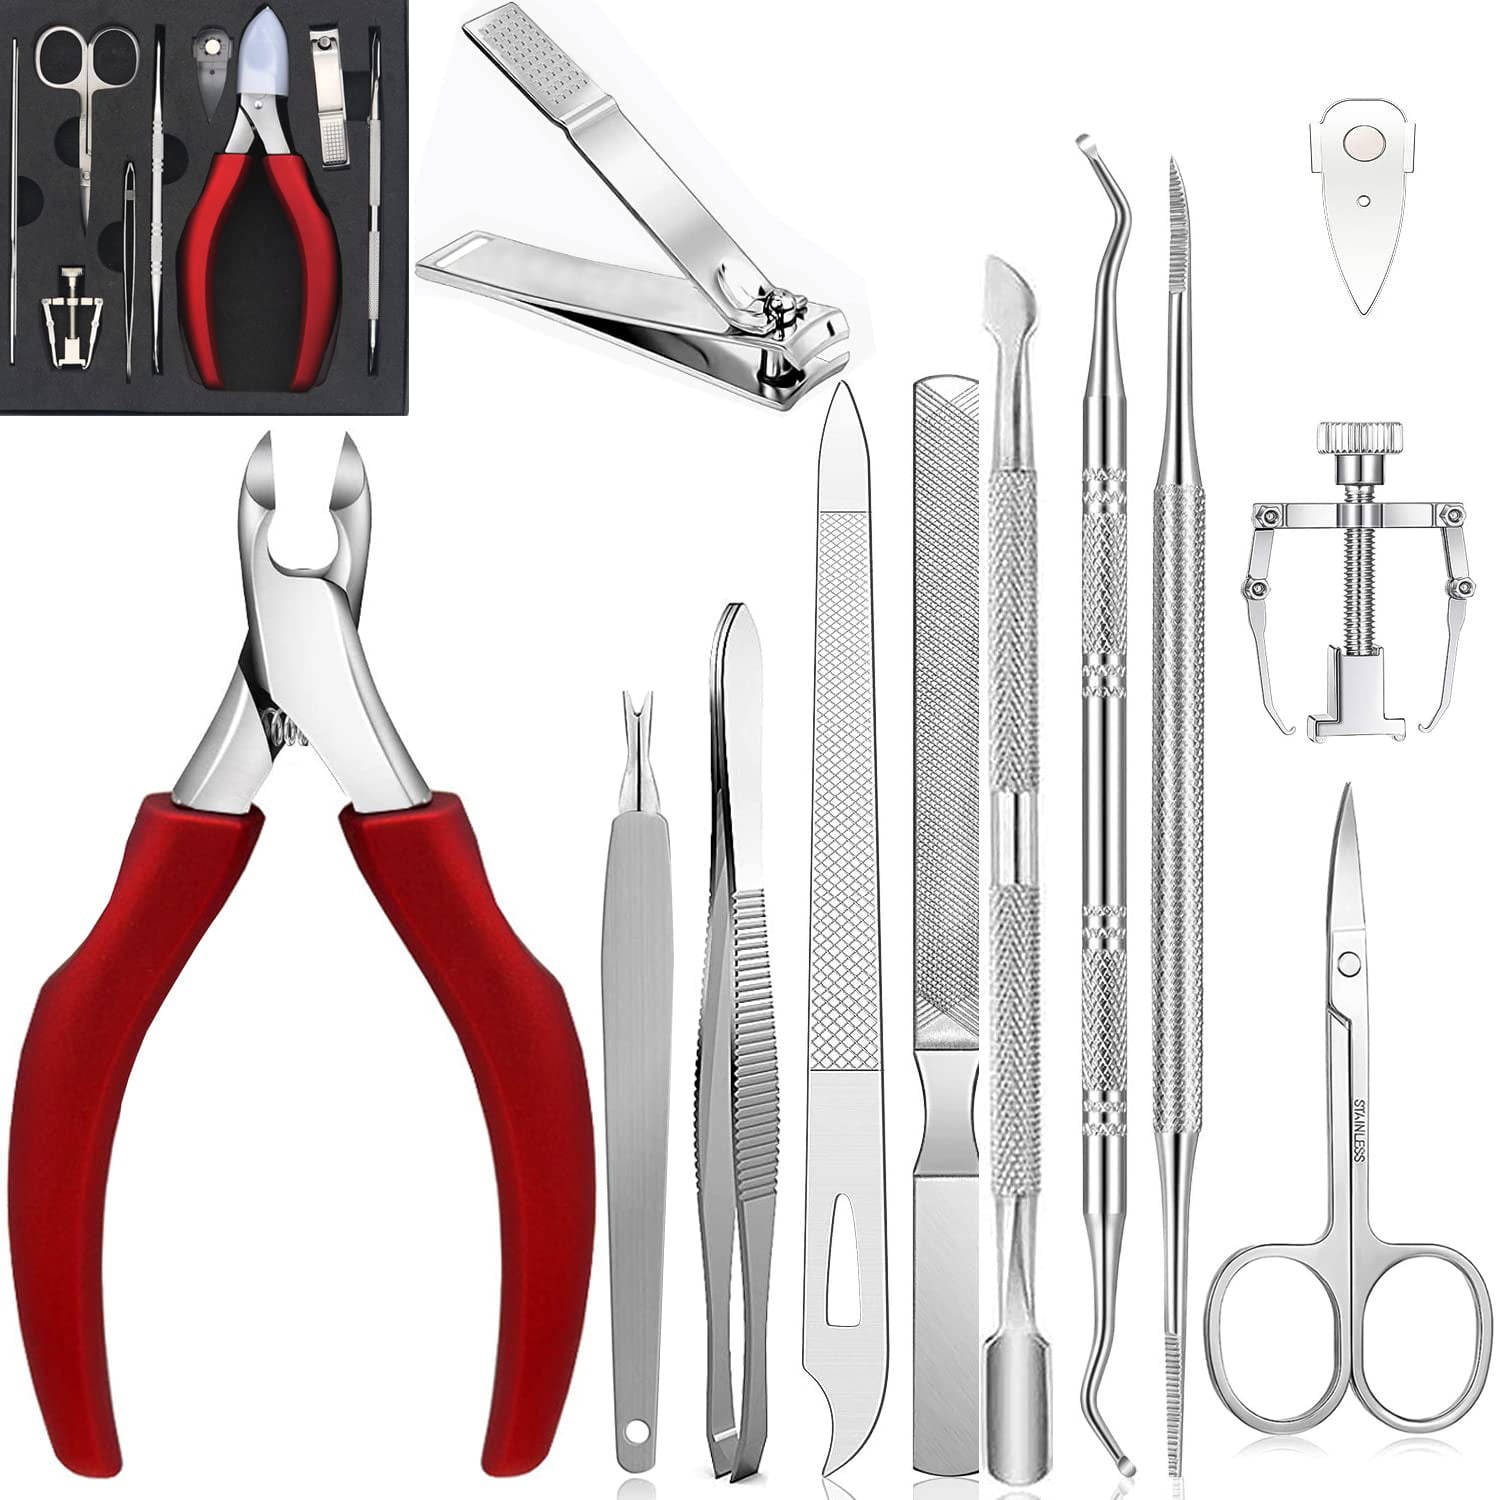 Ingrown Toenail Clippers (Upgrade), Steel Nail Clippers for Professional  Podiatrist, Unique Long Handle Curved Blade Tool for Thick & Ingrown Nails